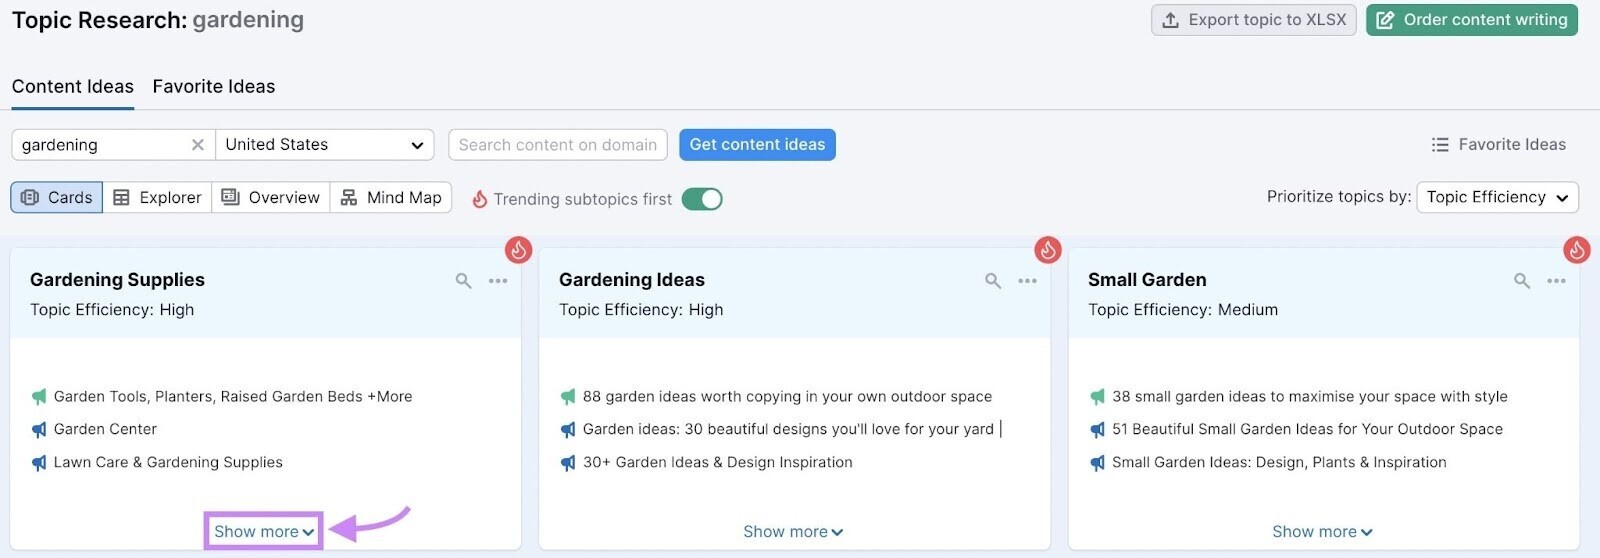 "Content ideas" tab in Topic Research